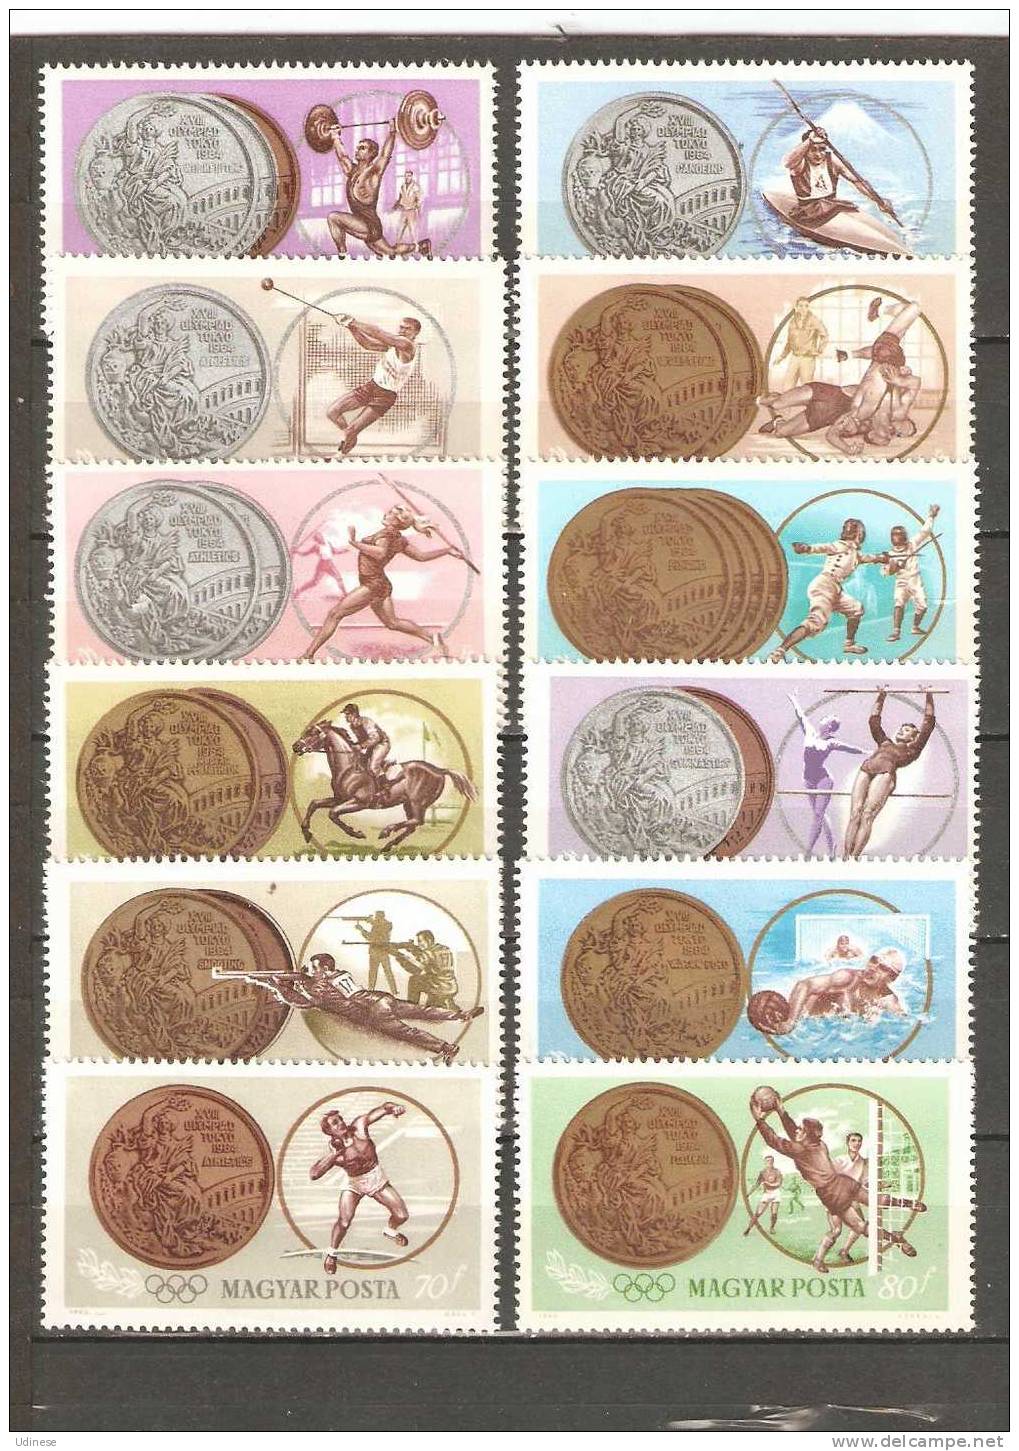 HUNGARY 1965 -  OLYMPIC GAMES - CPL. SET - MNH MINT NEUF - Unused Stamps